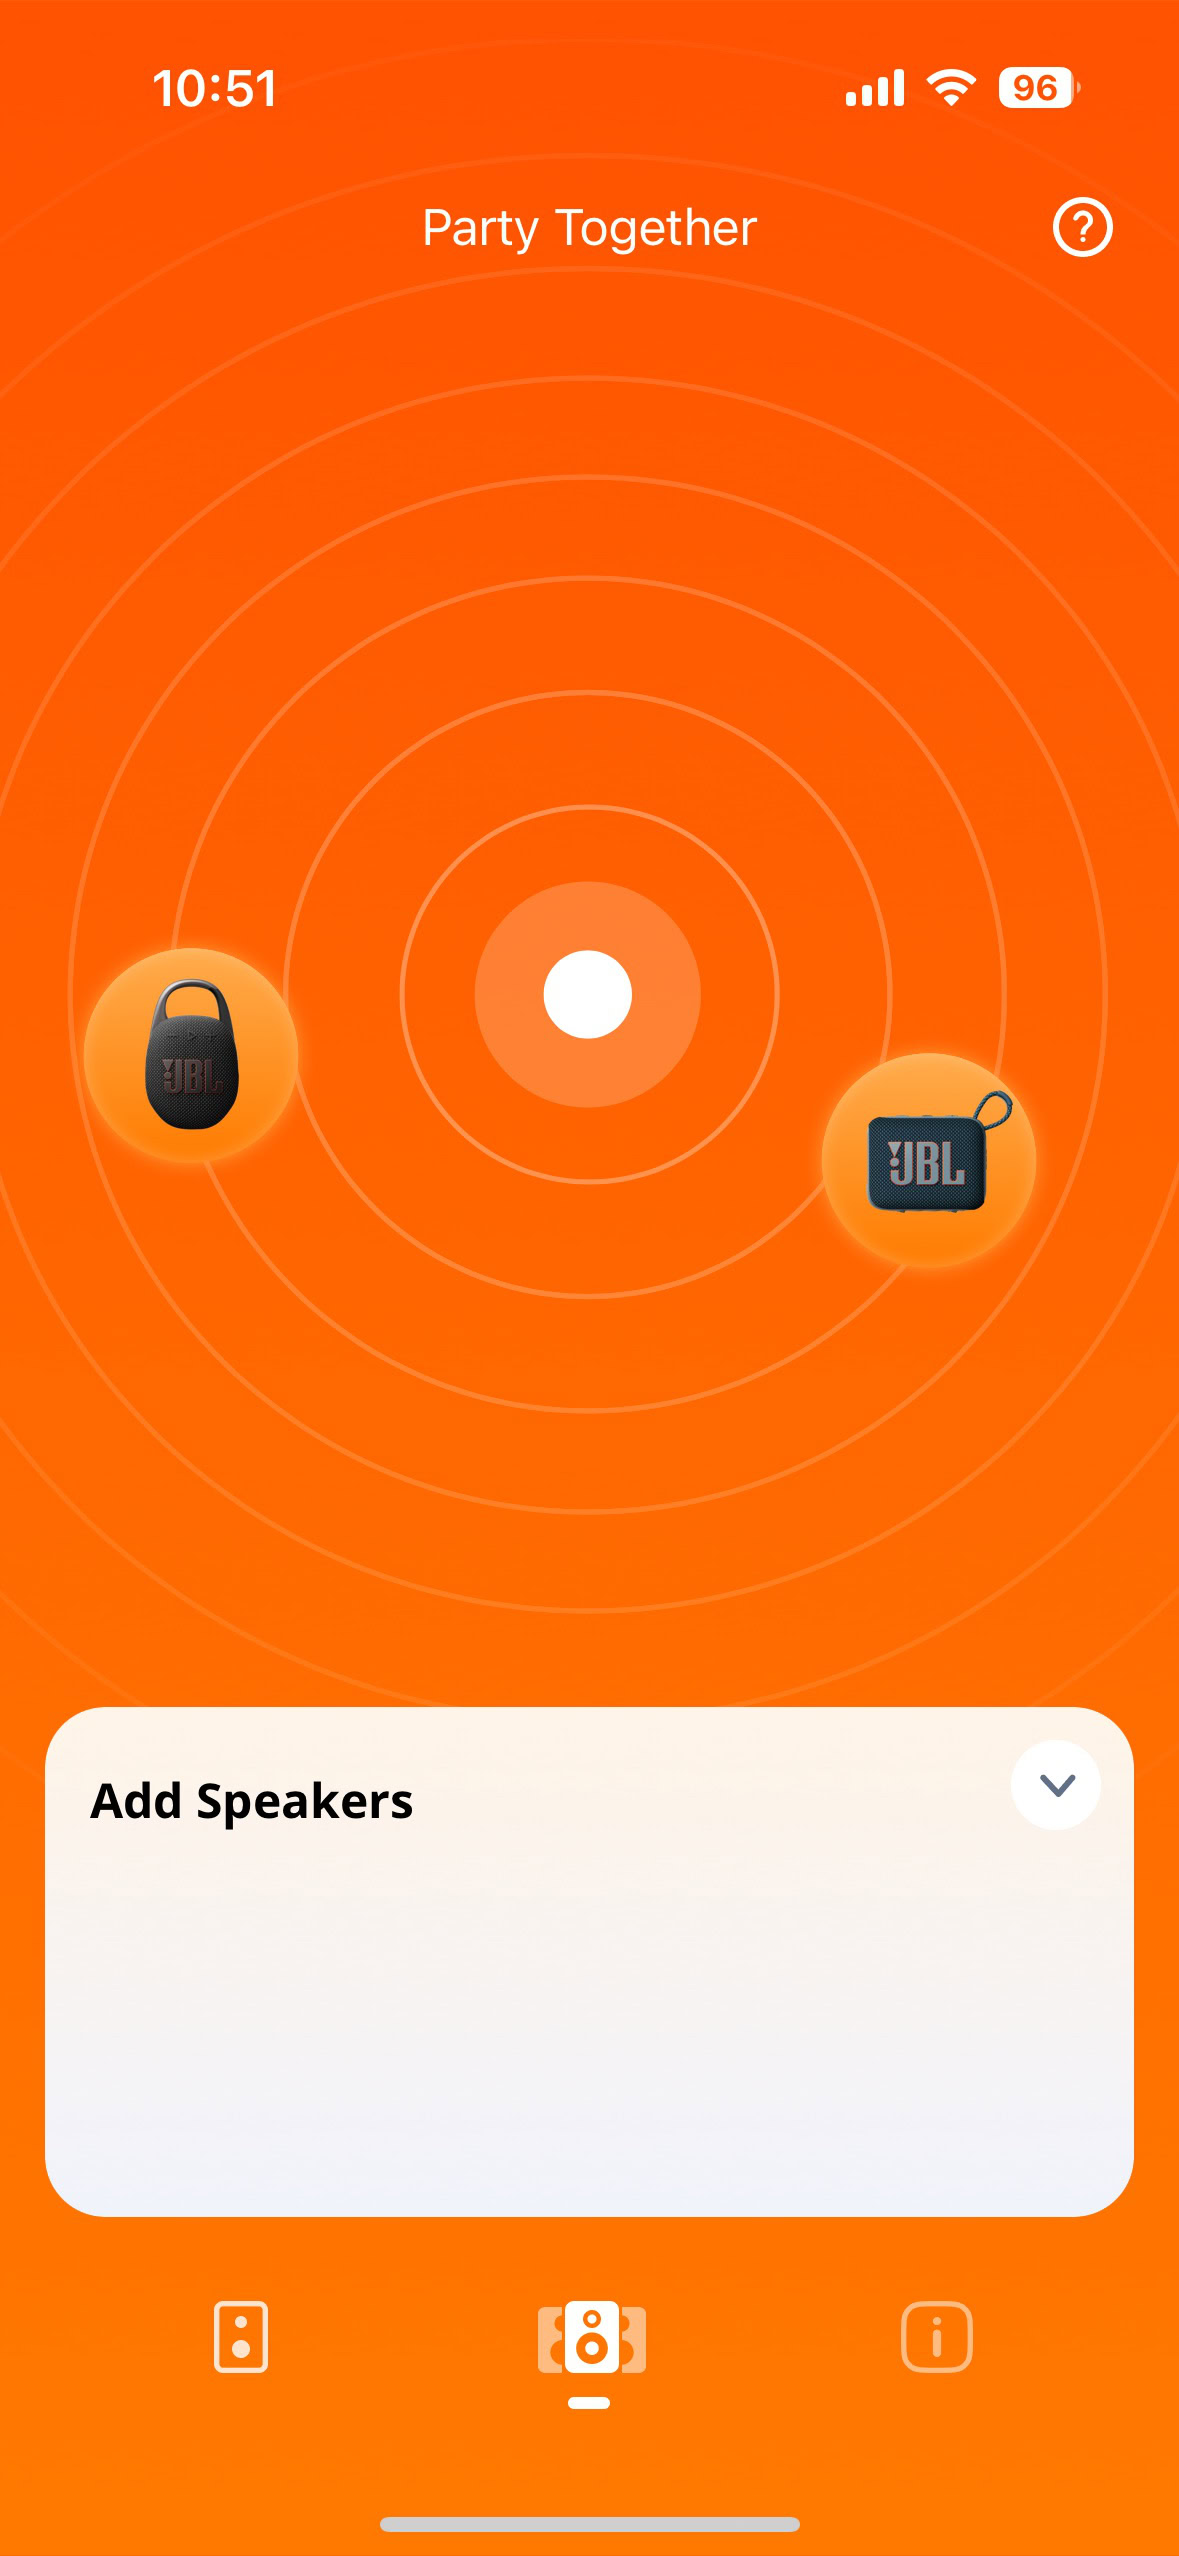 A screen shot of the JBL Portable app, showing the "Party Together" option, allowing you to connect other JBL speakers.